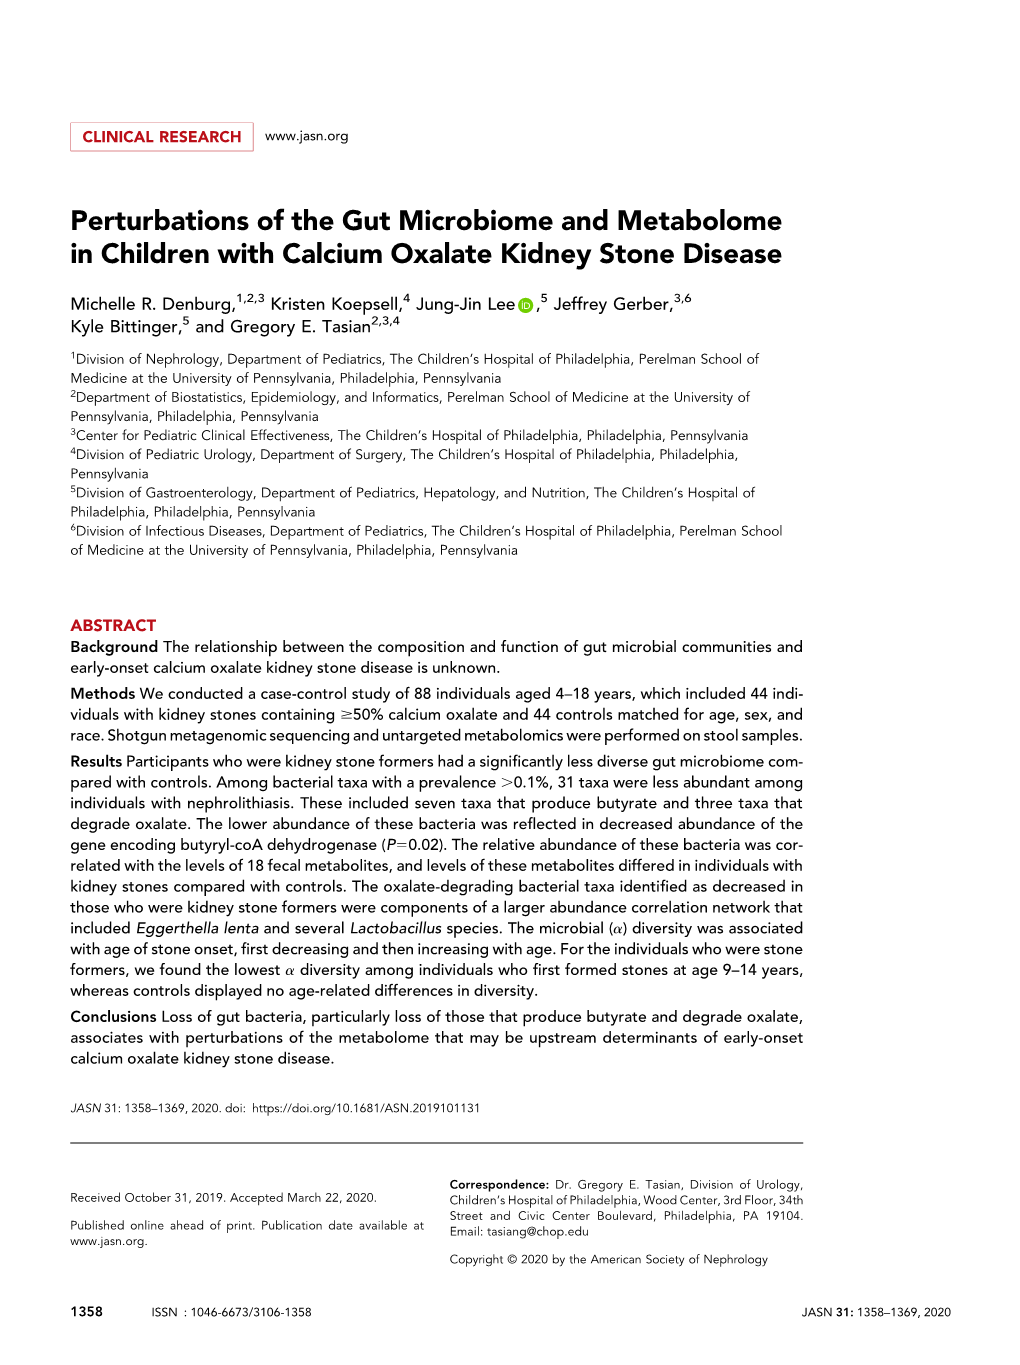 Perturbations of the Gut Microbiome and Metabolome in Children with Calcium Oxalate Kidney Stone Disease